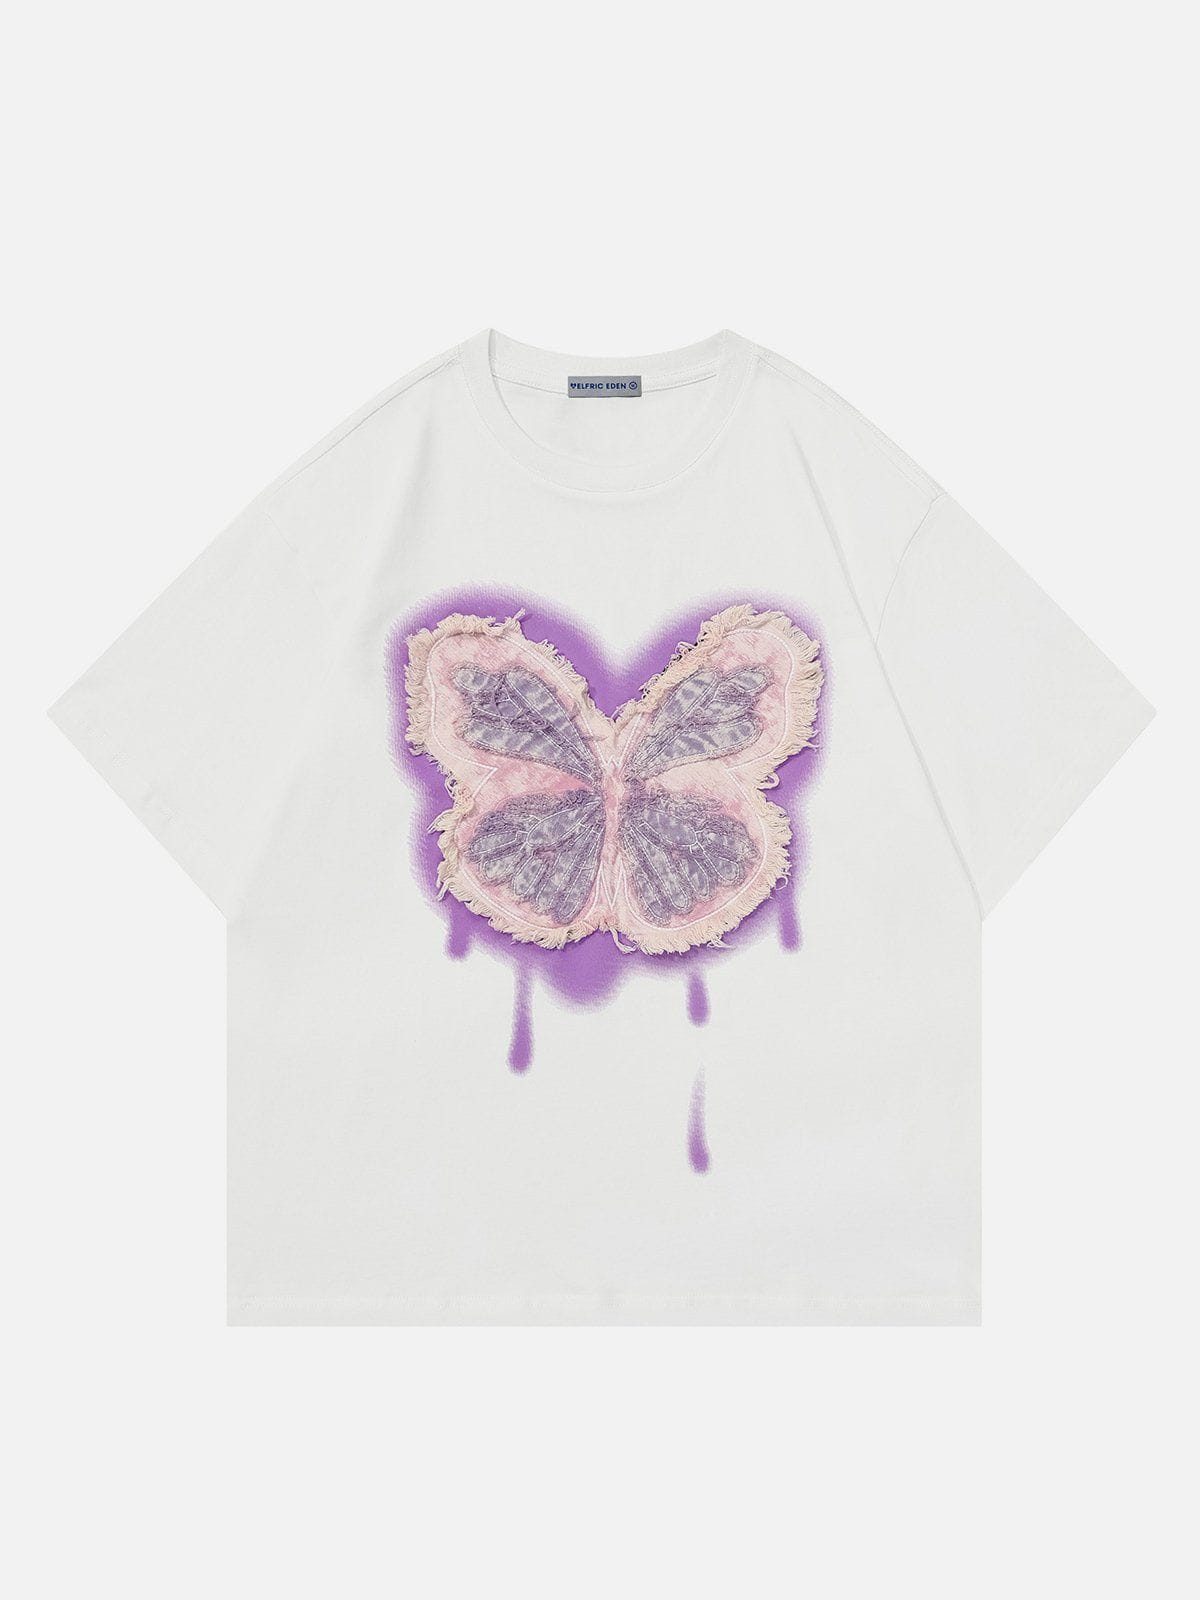 Aelfric Eden Applique Embroidery Butterfly Tee